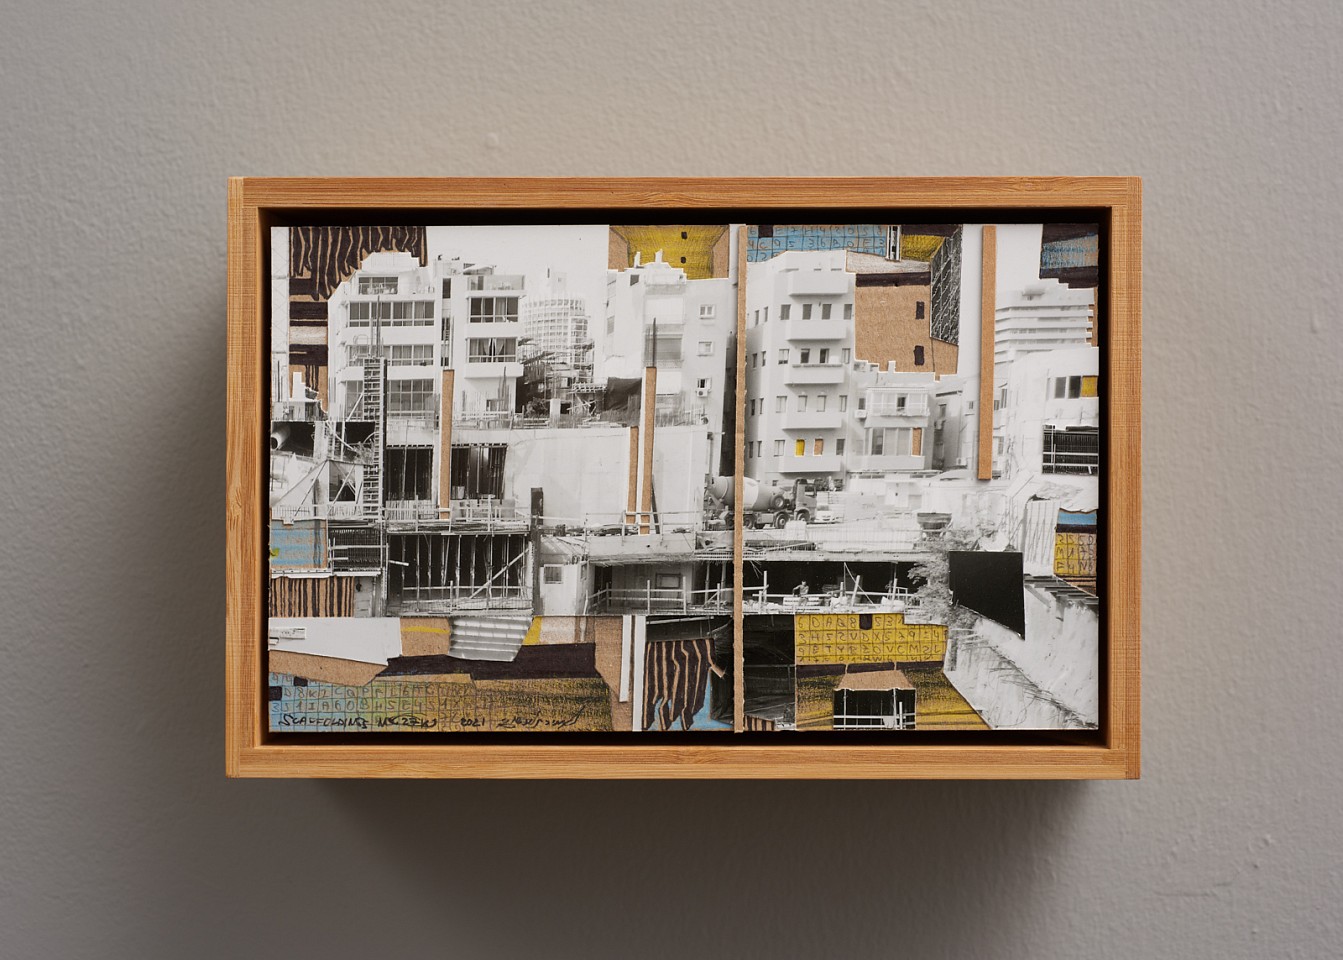 Amir Tomashov, Scaffoldings no.27e
2021, Graphite, ink, marker, crayons and collage on cardboard